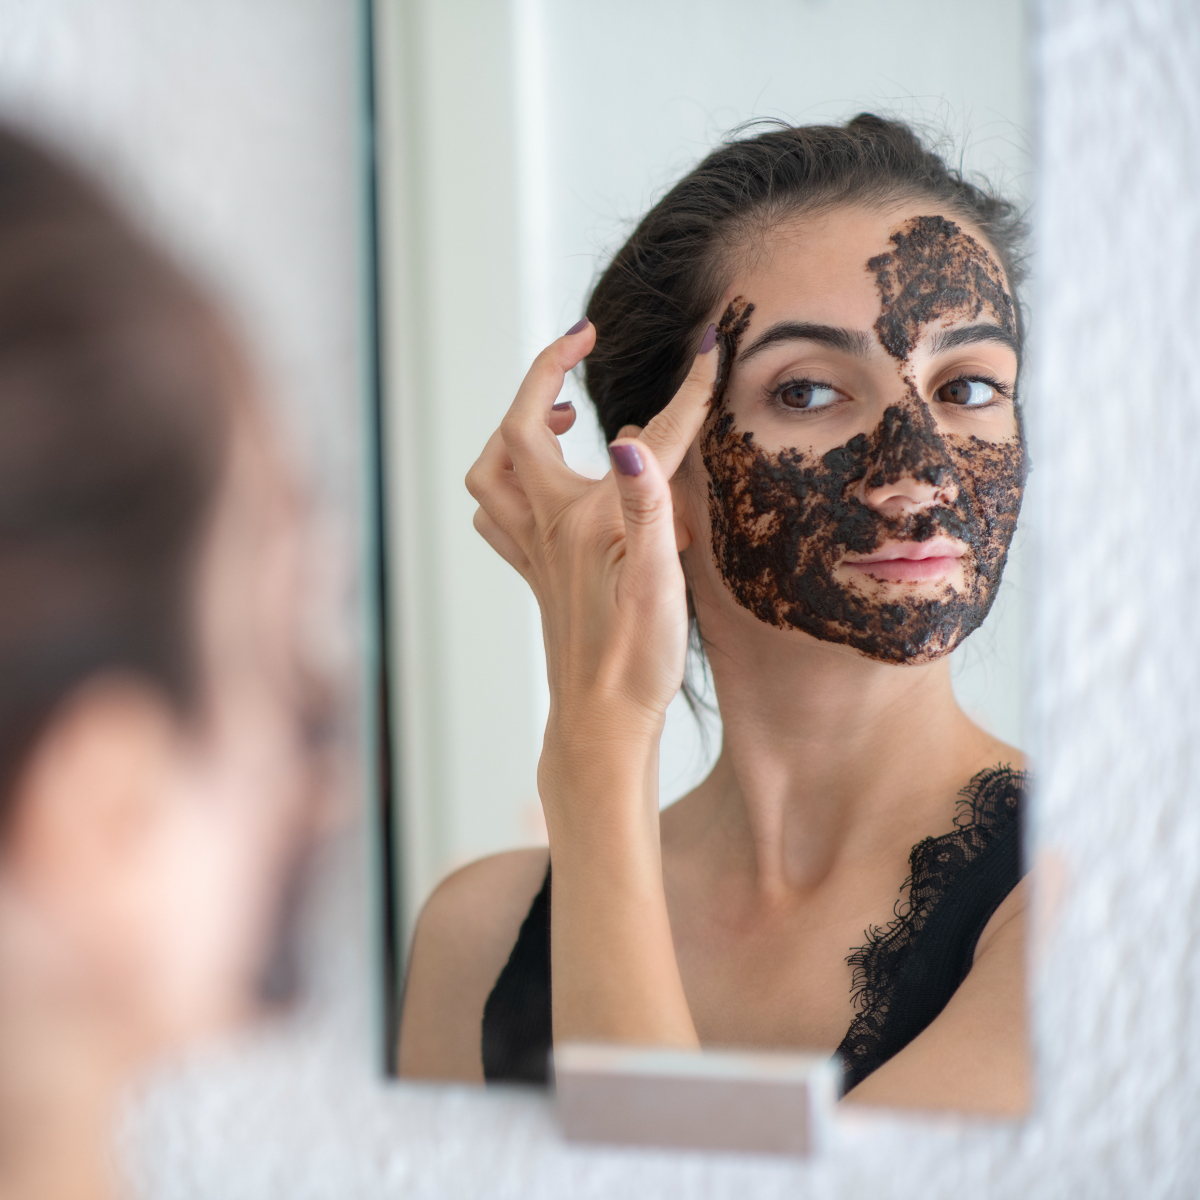 Amazon Sale: Coffee face scrubs under Rs 399 for glowing & youthful skin